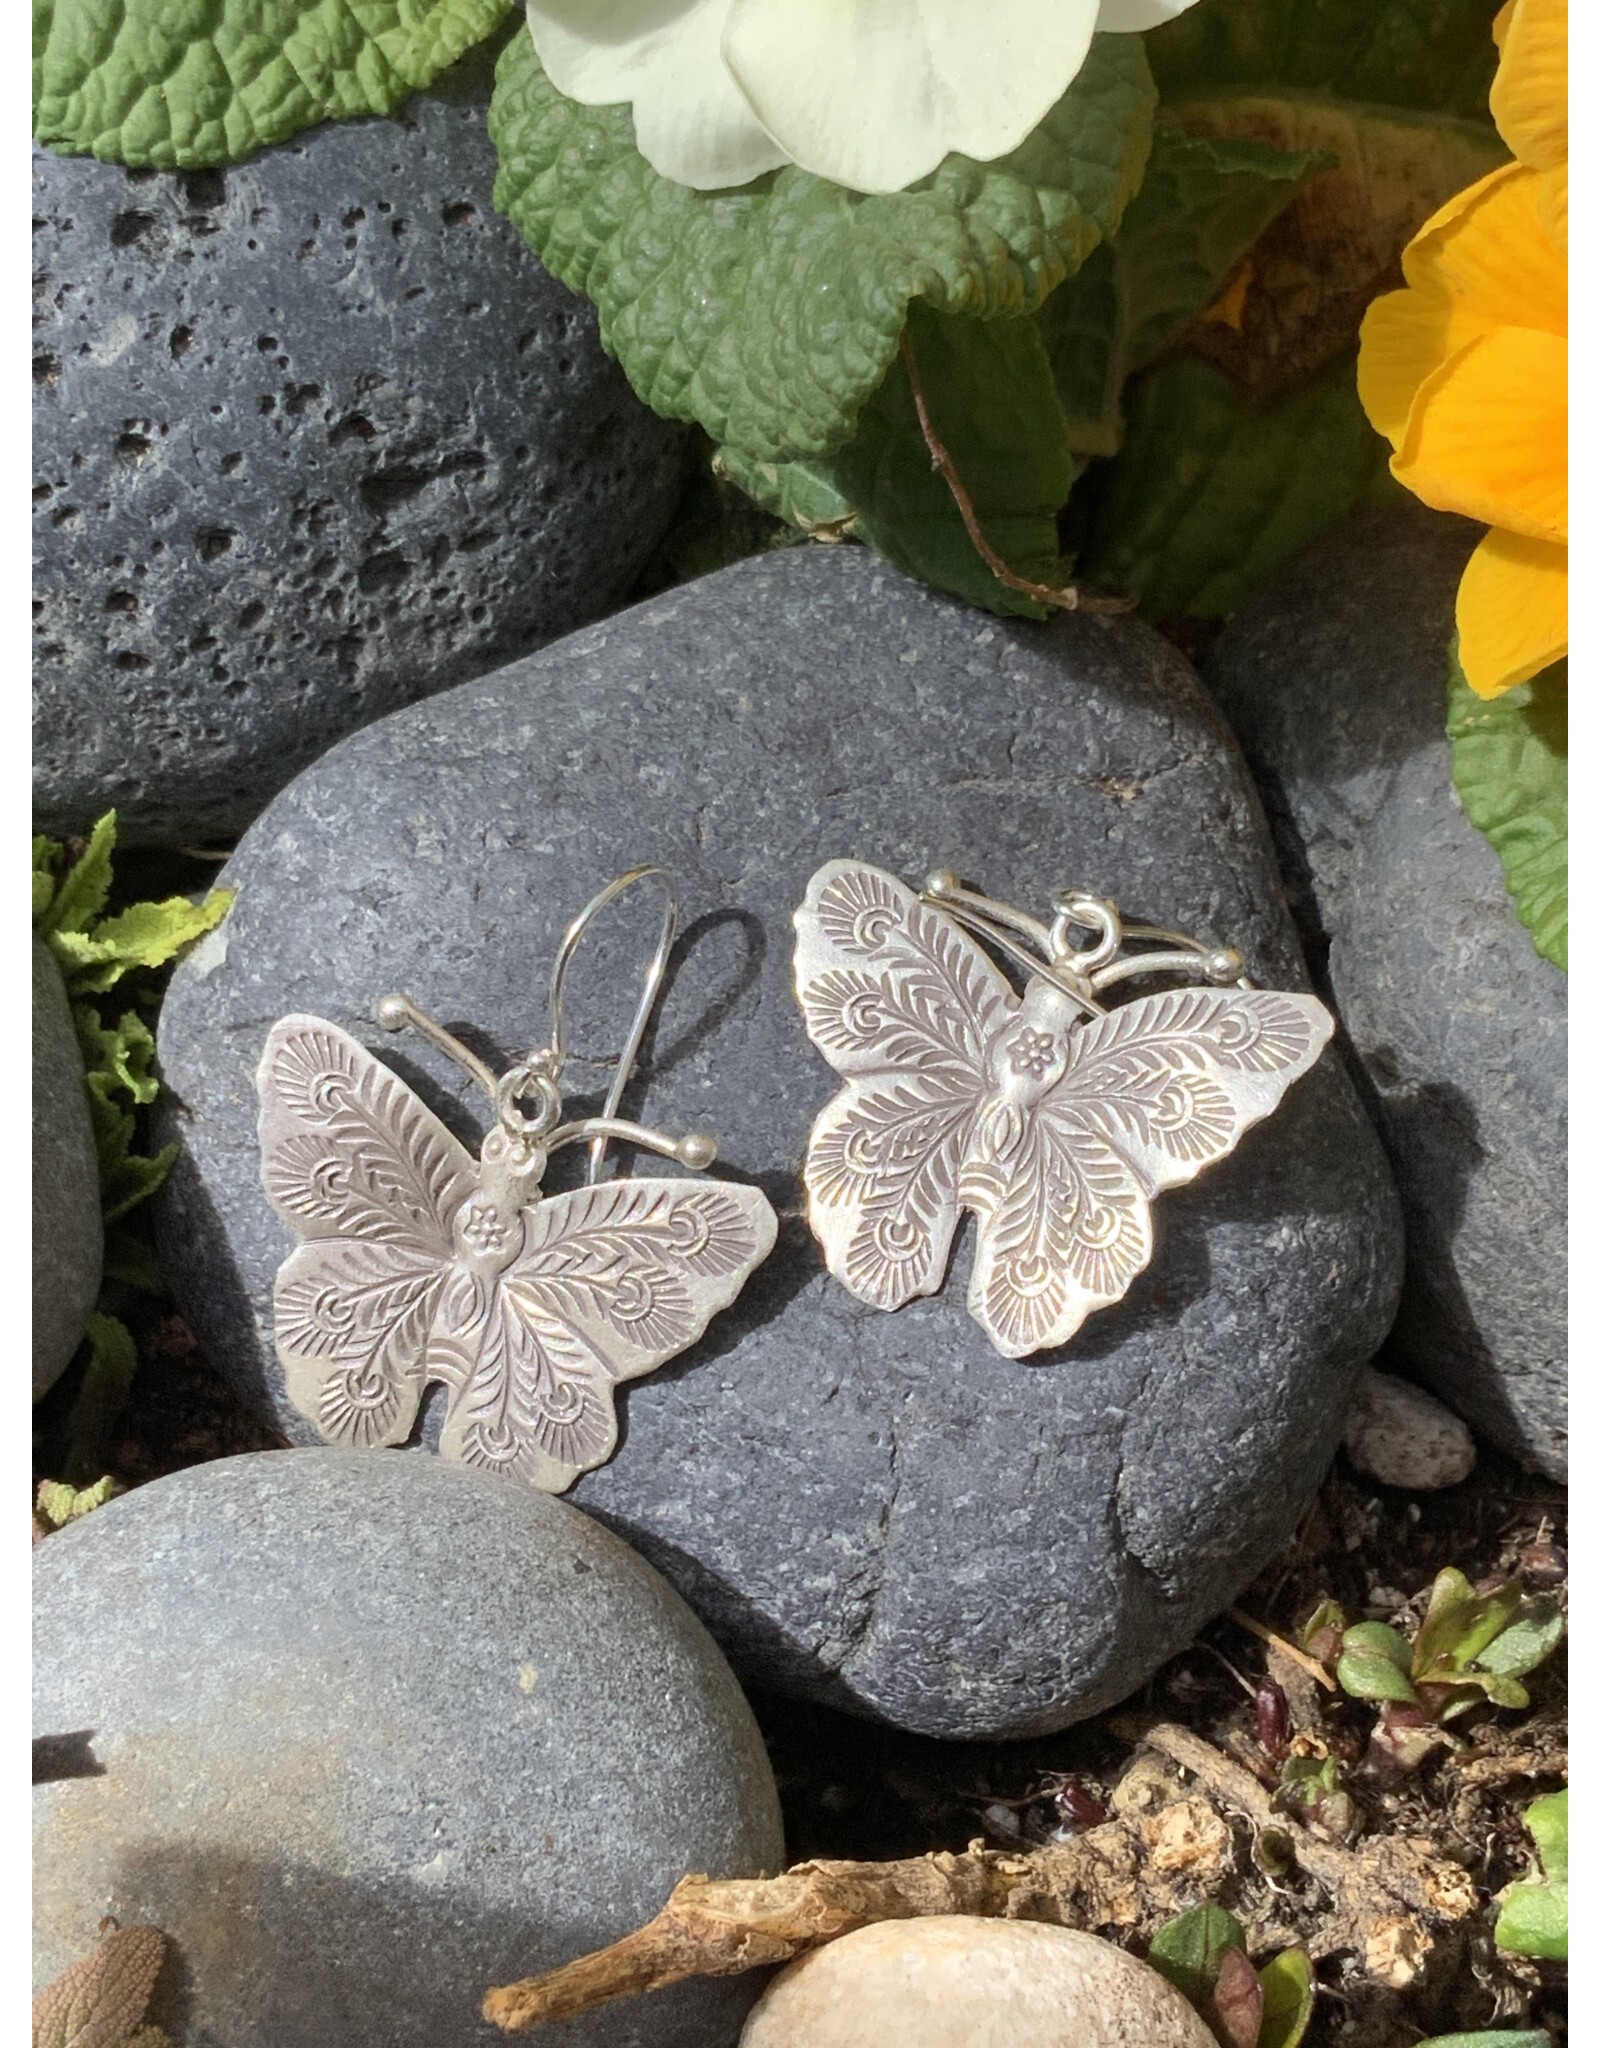 Annette Colby - Jeweler Earrings Sterling Silver Butterfly on Wires - AC